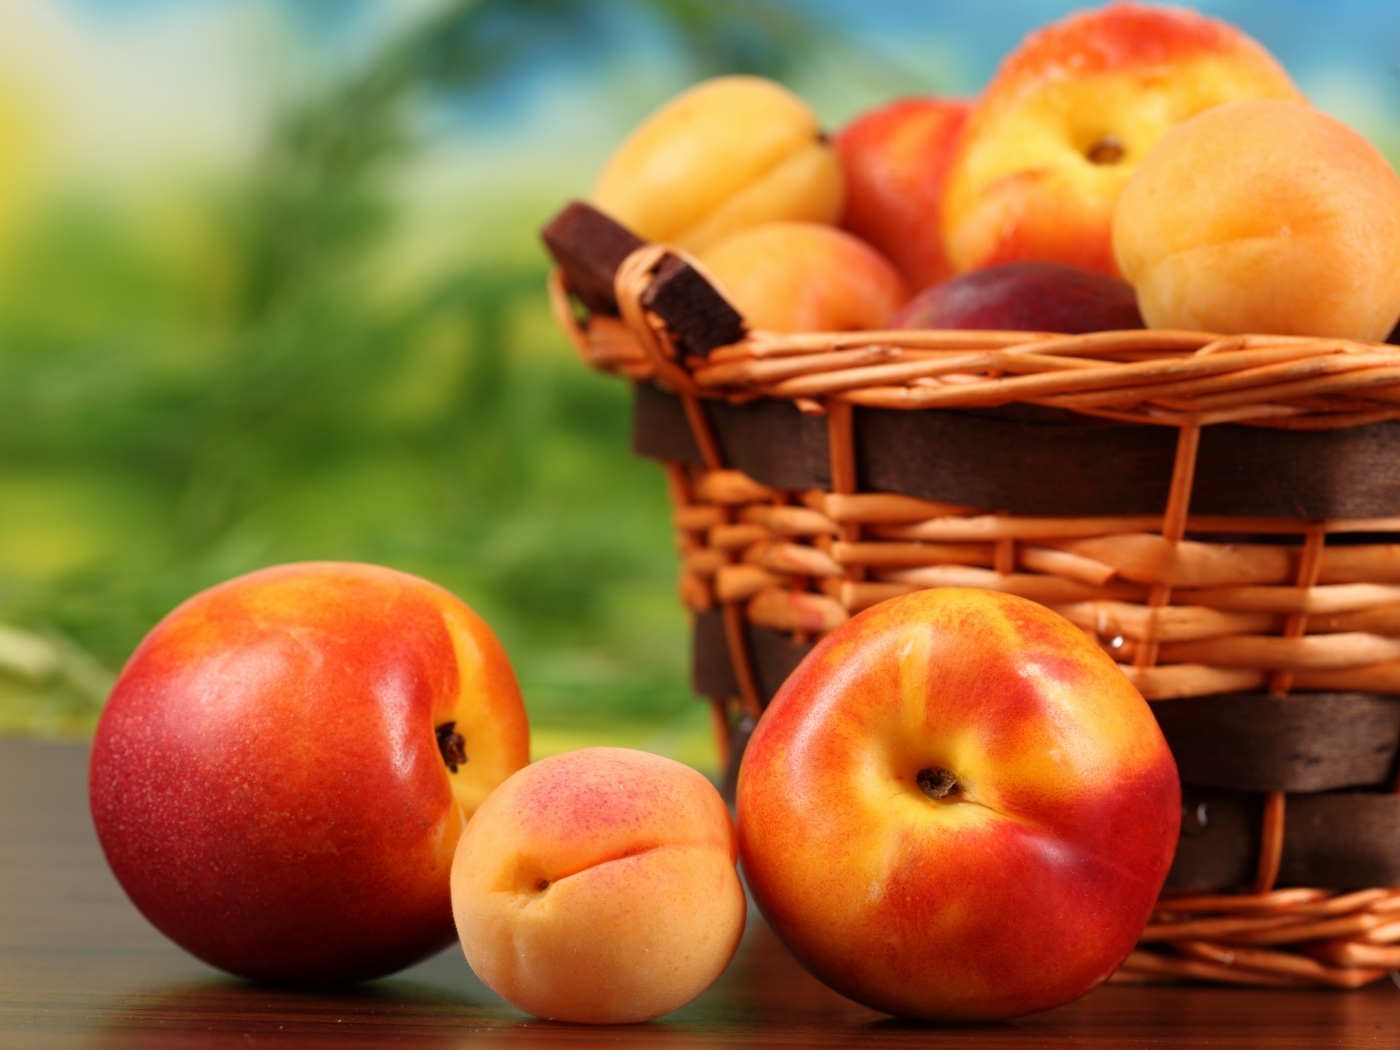 31086 download wallpaper fruits, food, peaches screensavers and pictures for free